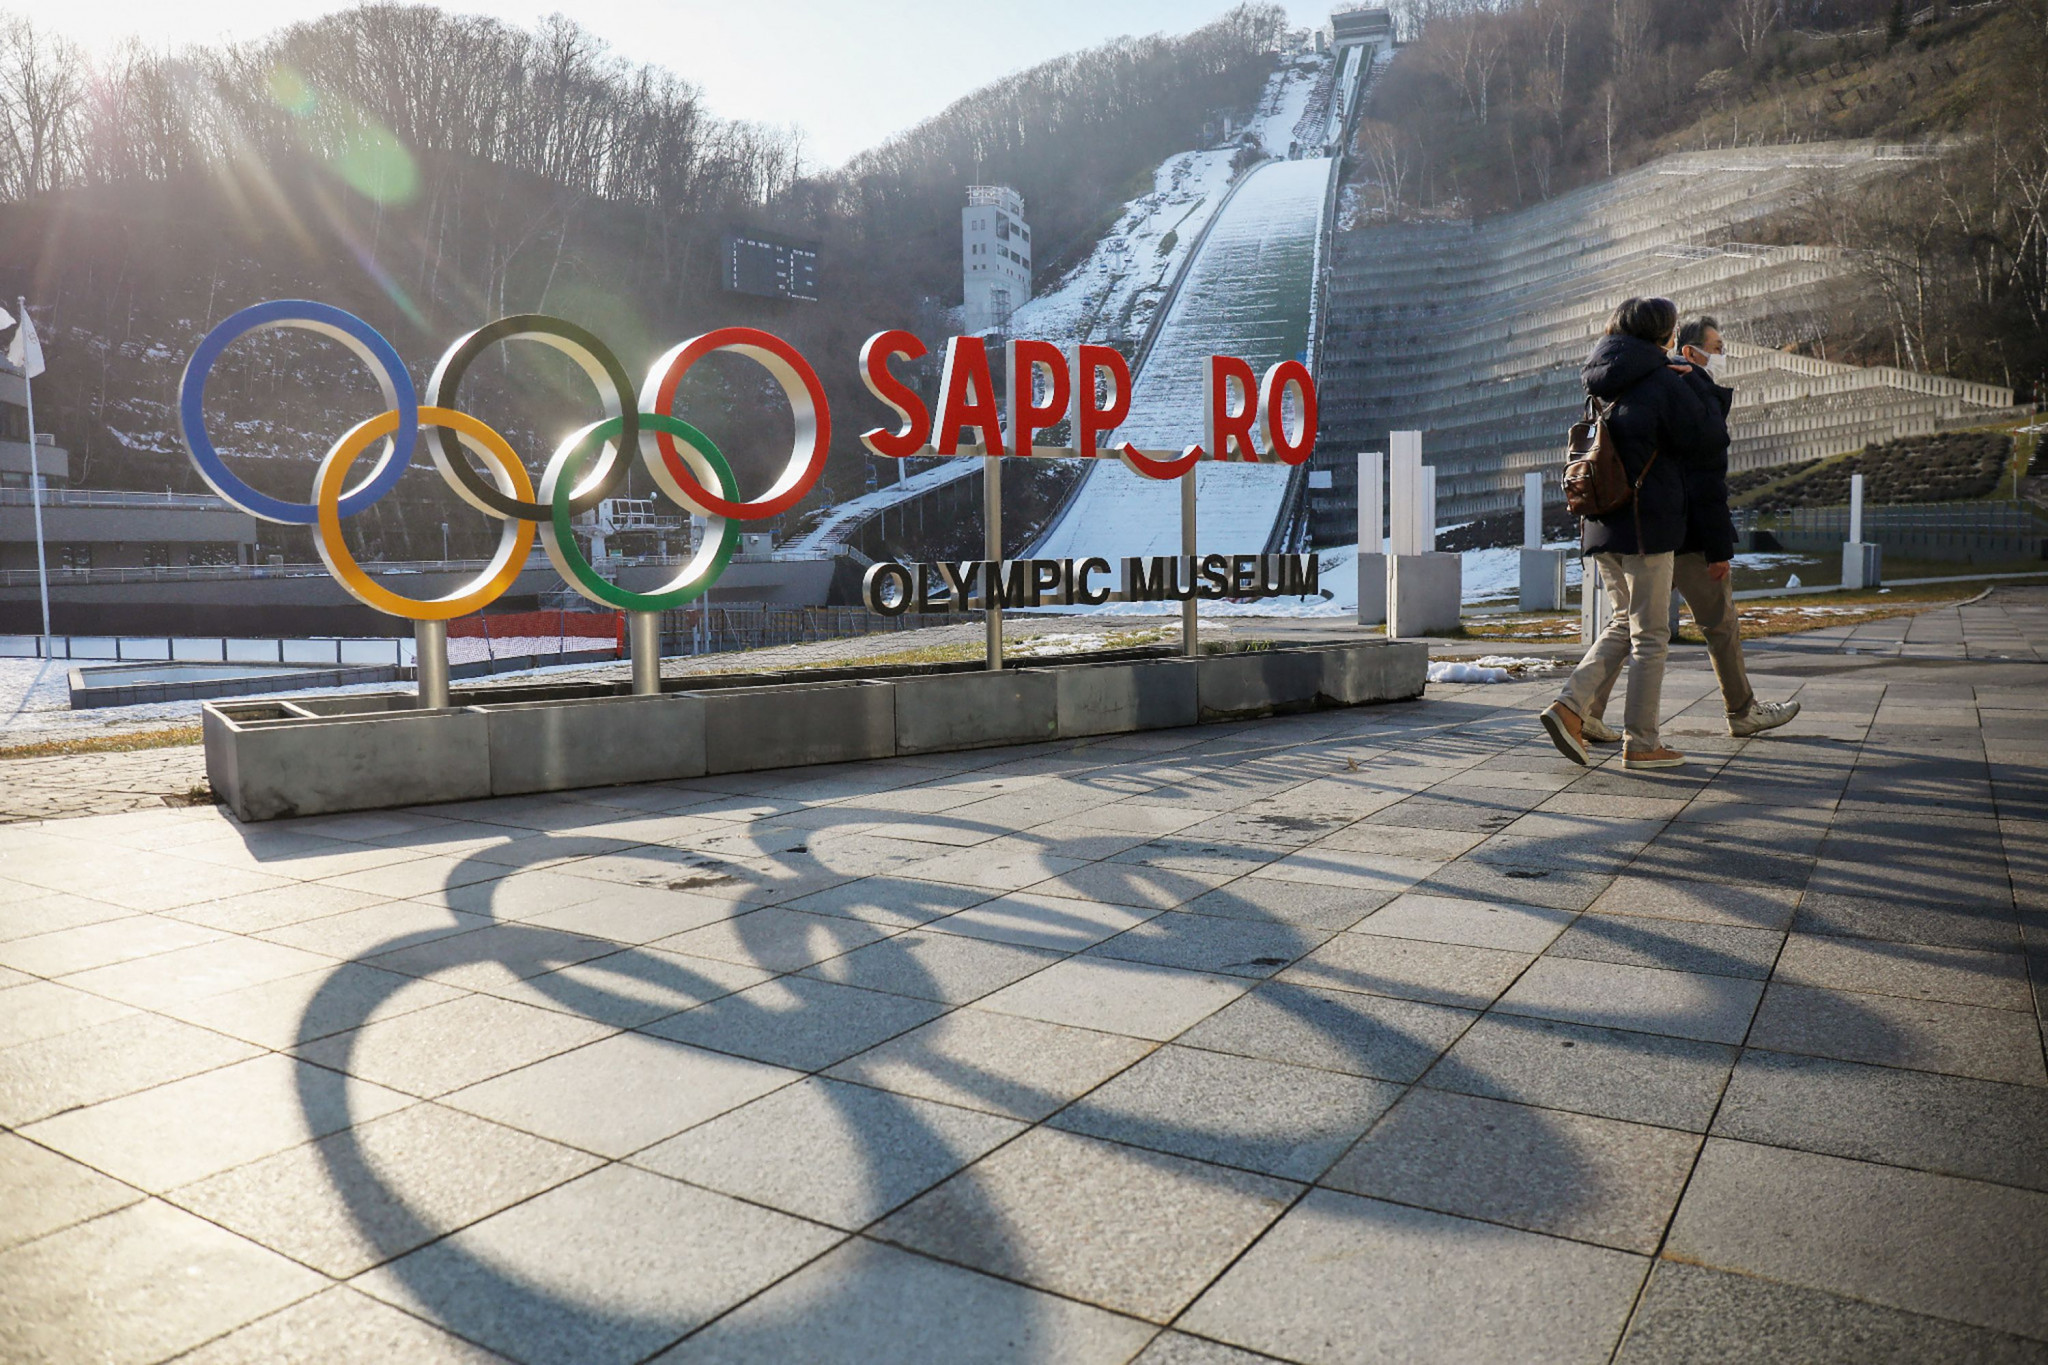 Sapporo is preparing a bid to host the 2030 Winter Olympic and Paralympic Games ©Getty Images